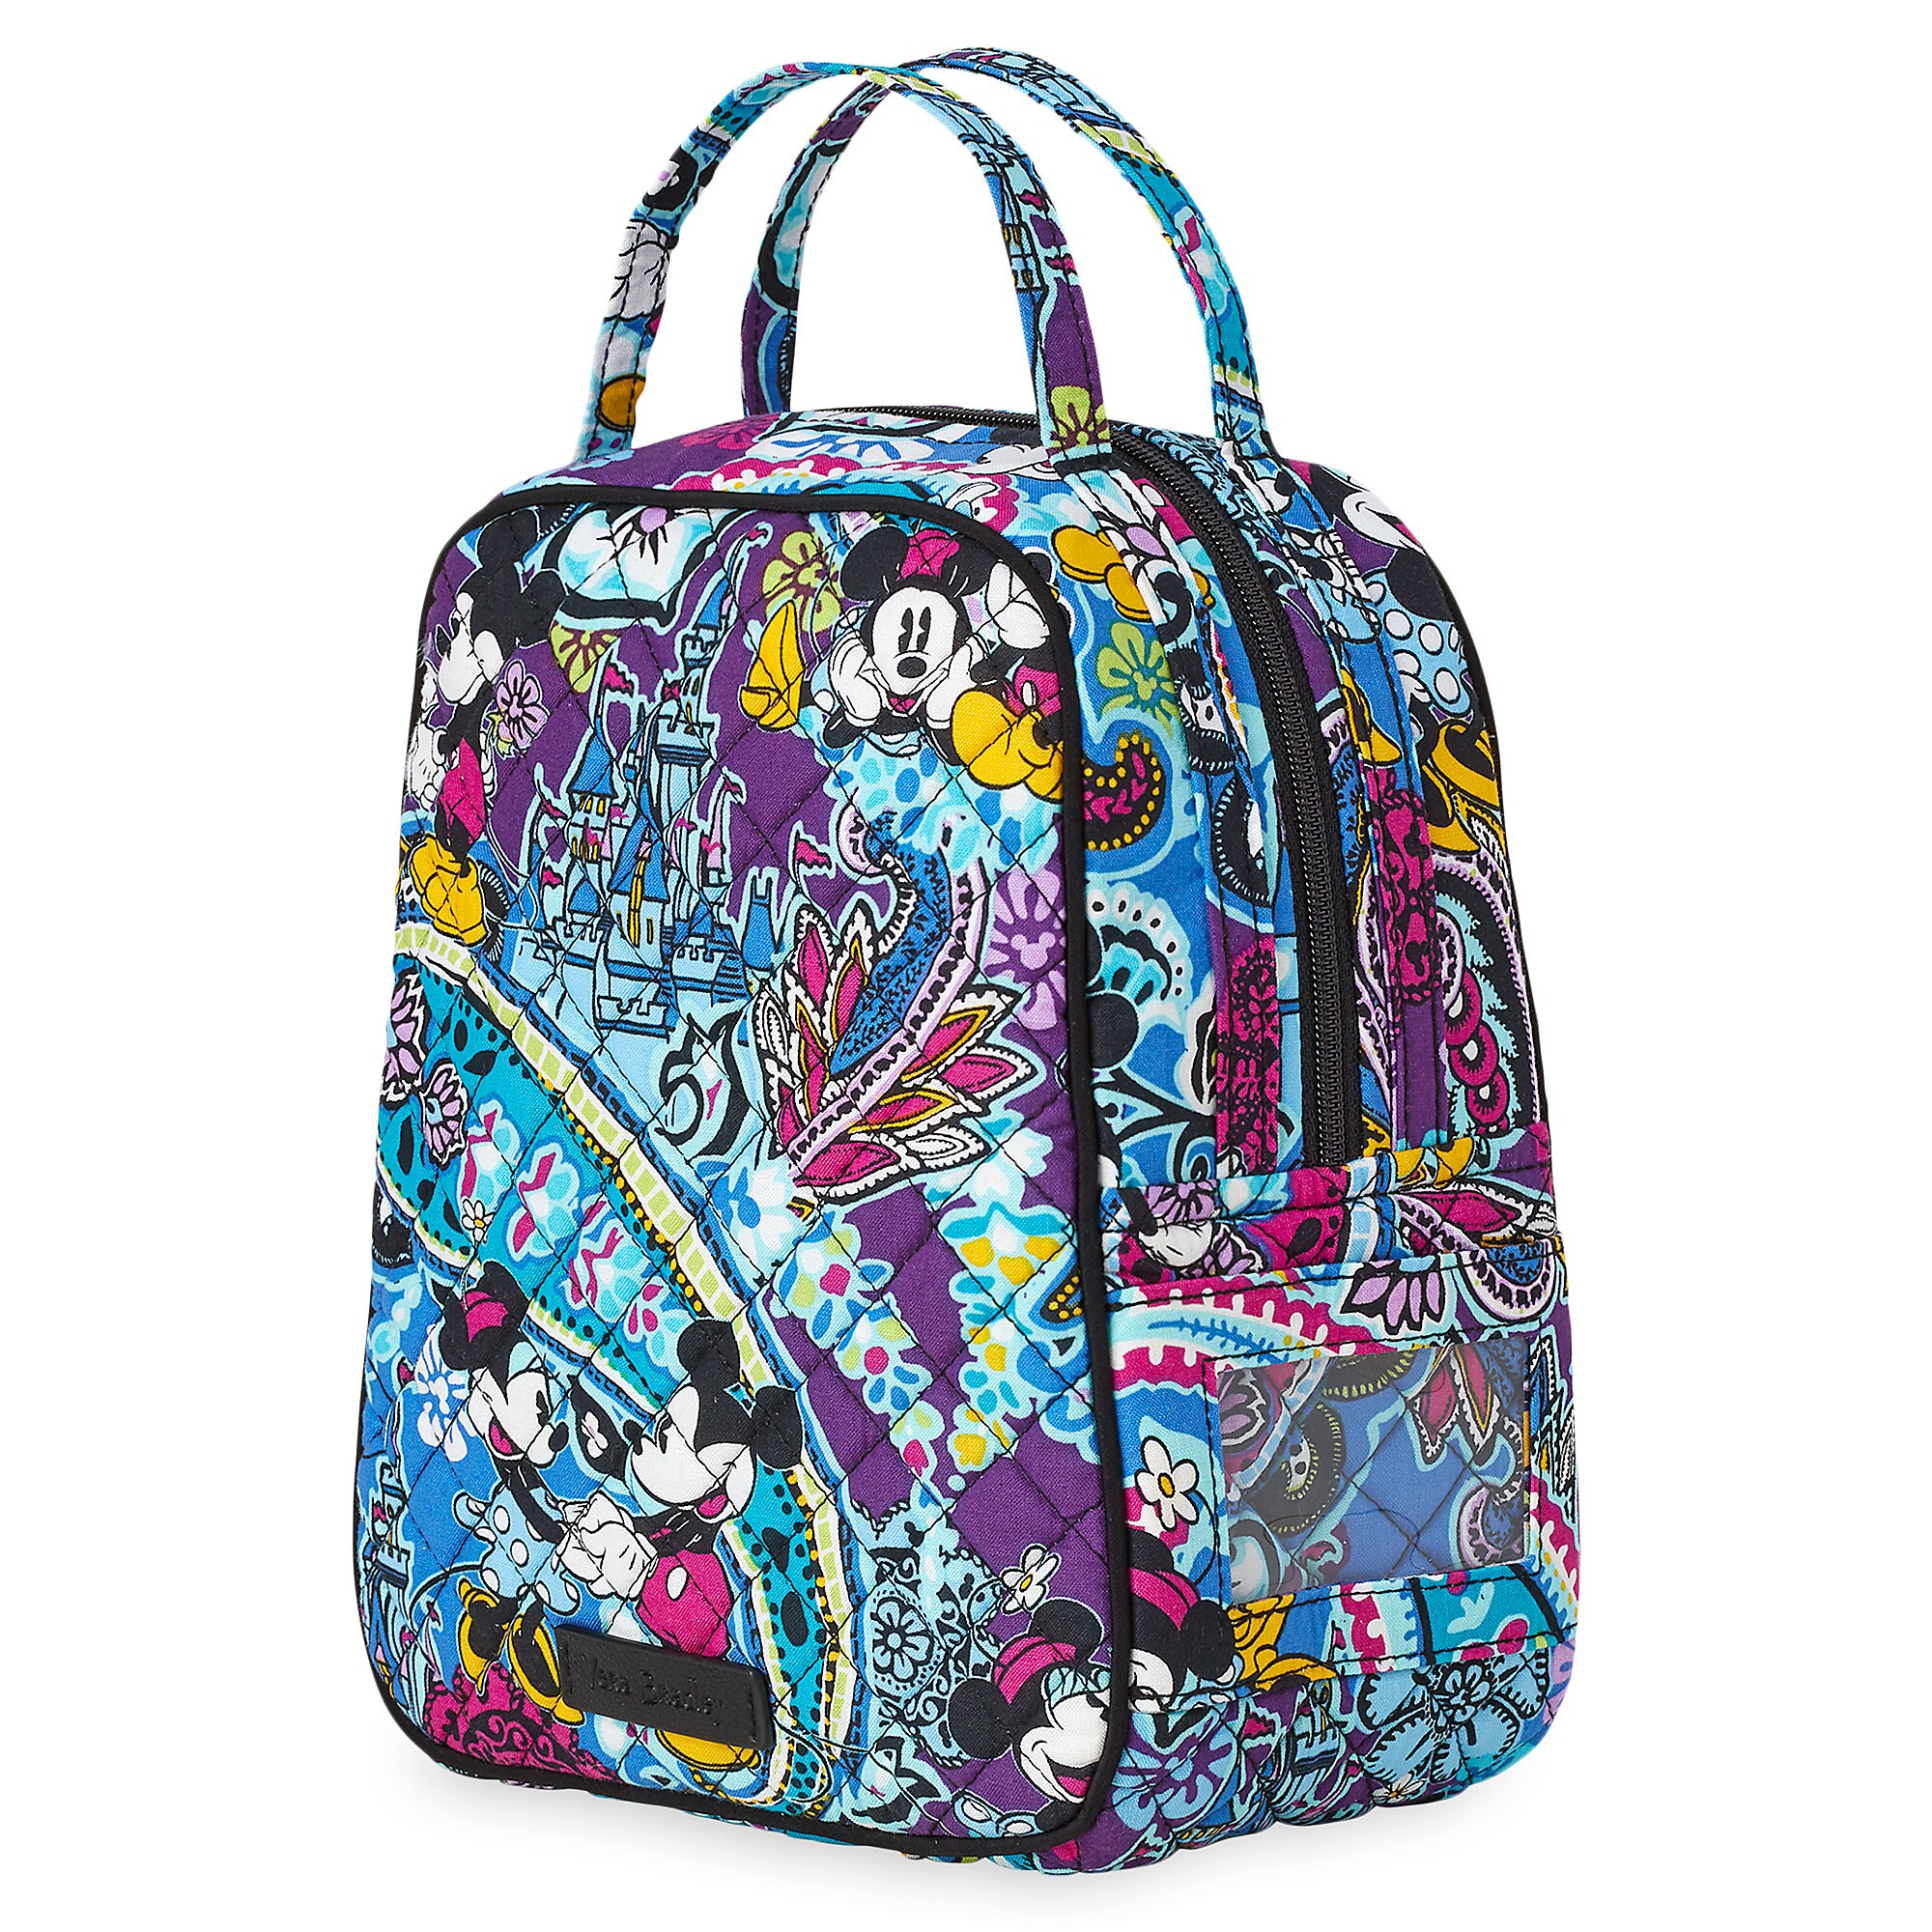 Mickey and Minnie Mouse Paisley Lunch Bunch Bag by Vera Bradley